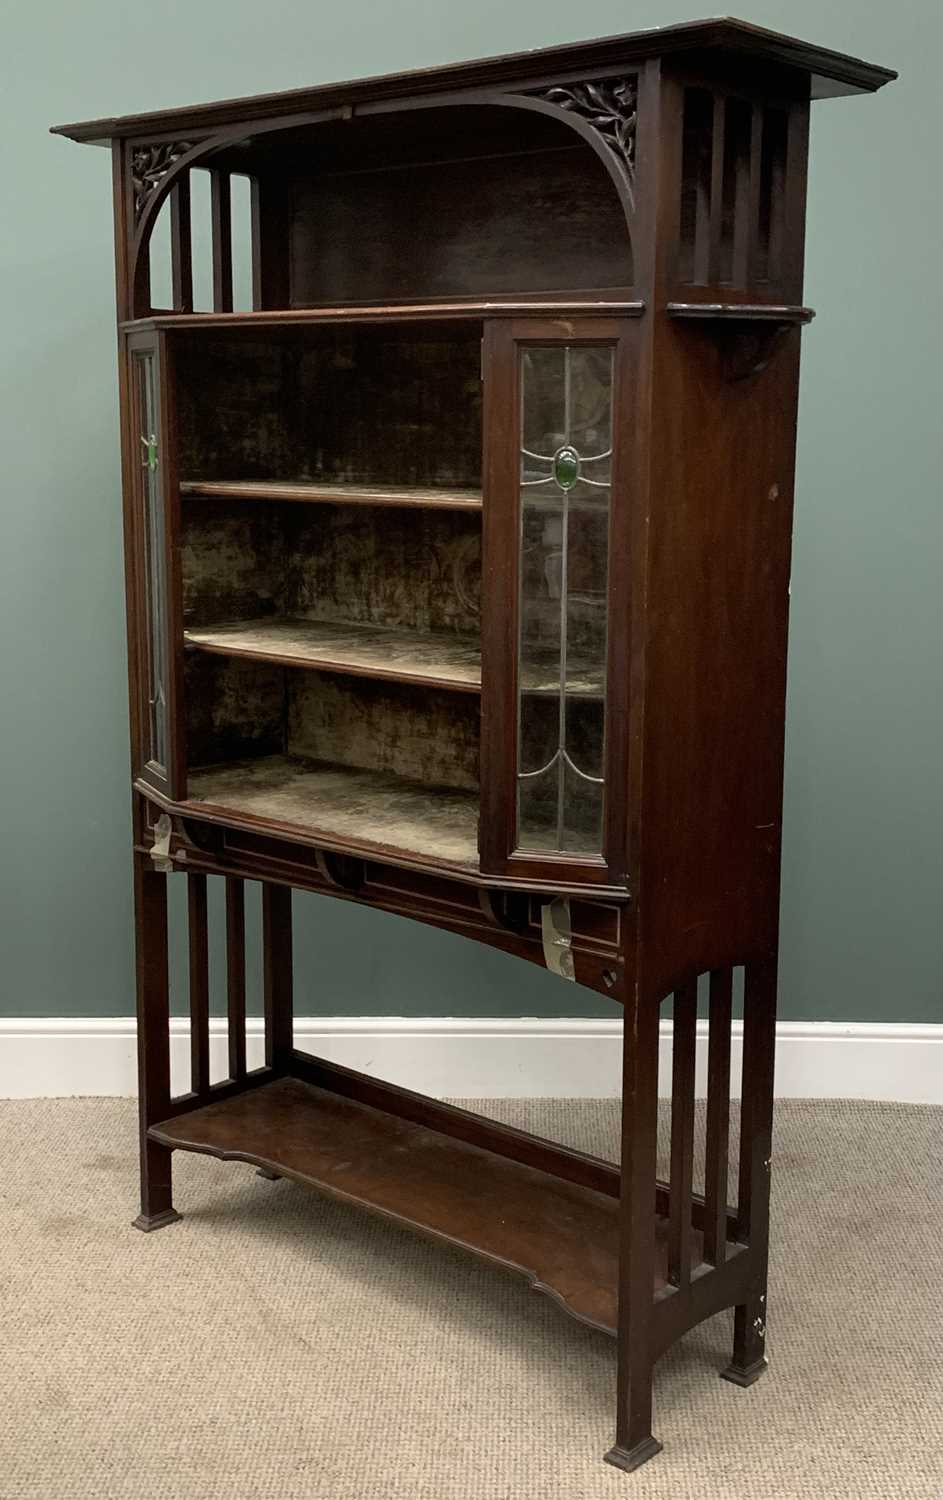 EDWARDIAN MAHOGANY CHINA CABINET with Arts & Crafts features and leaded glass panels, 183 (h) x - Image 3 of 4